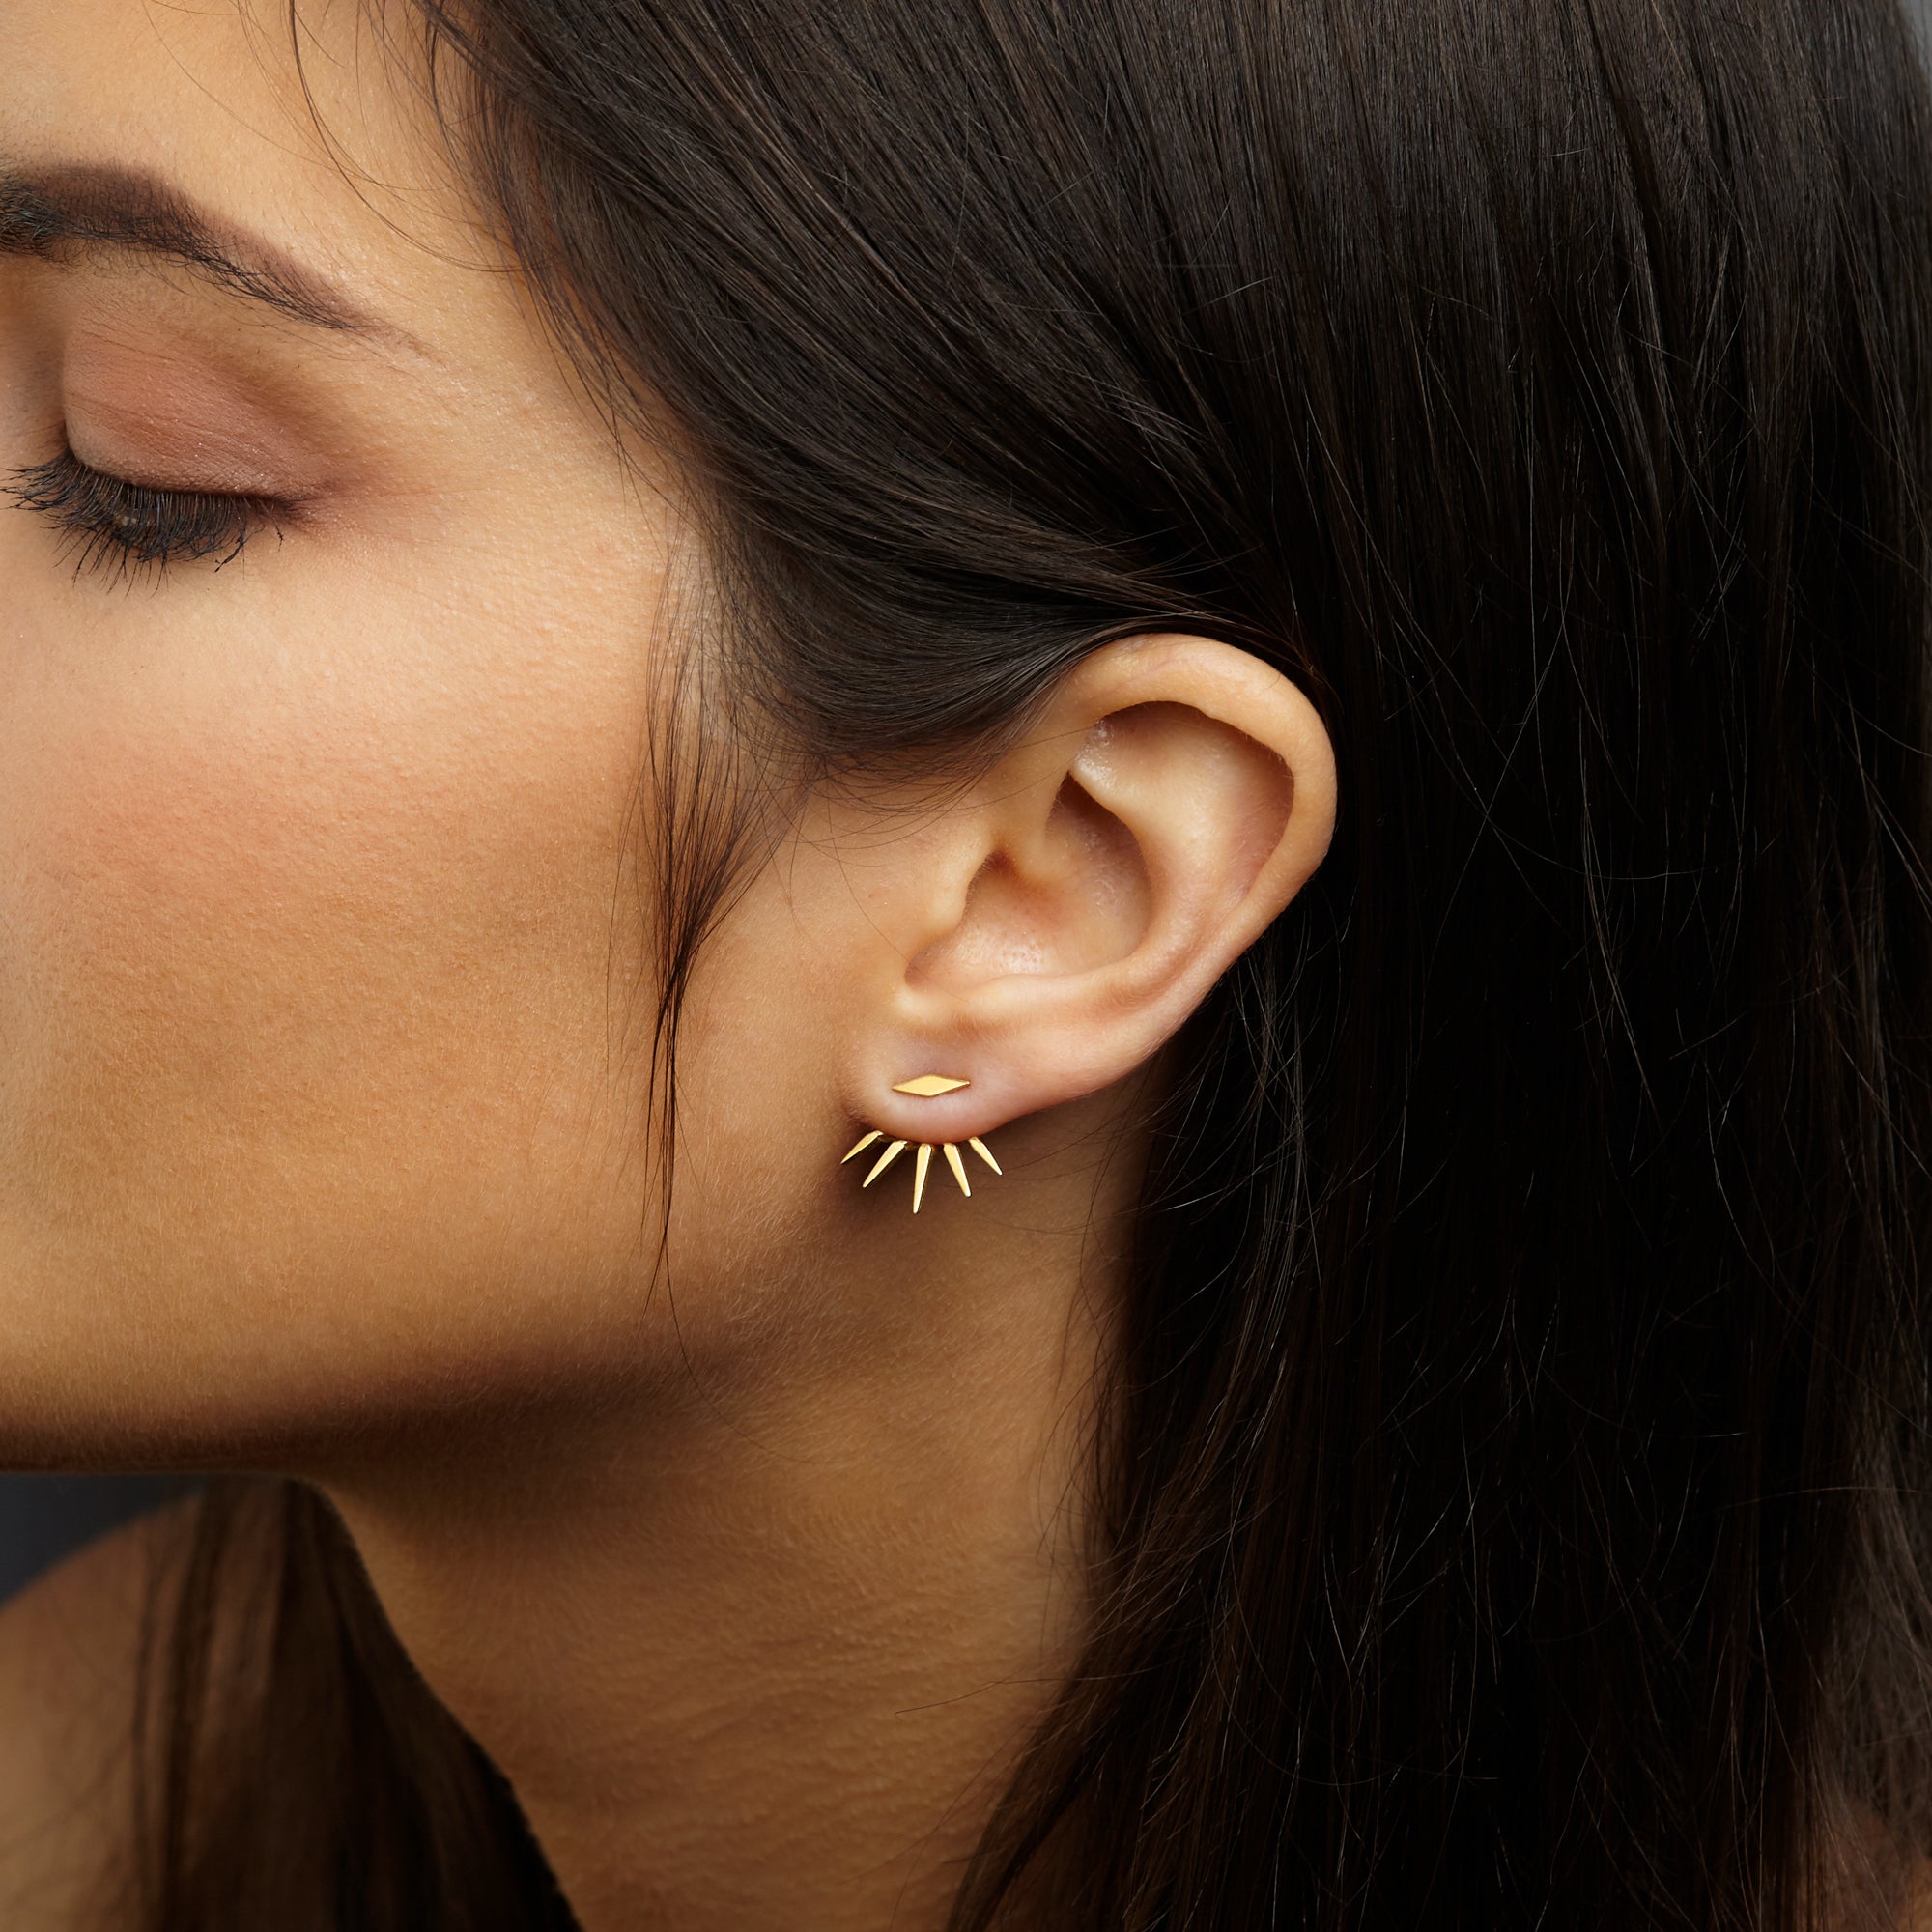 Adjustable Spike Ear Jacket in Sterling Silver with 18k Gold and Rose Gold Plating - Hypoallergenic and Stylish Bijou Her